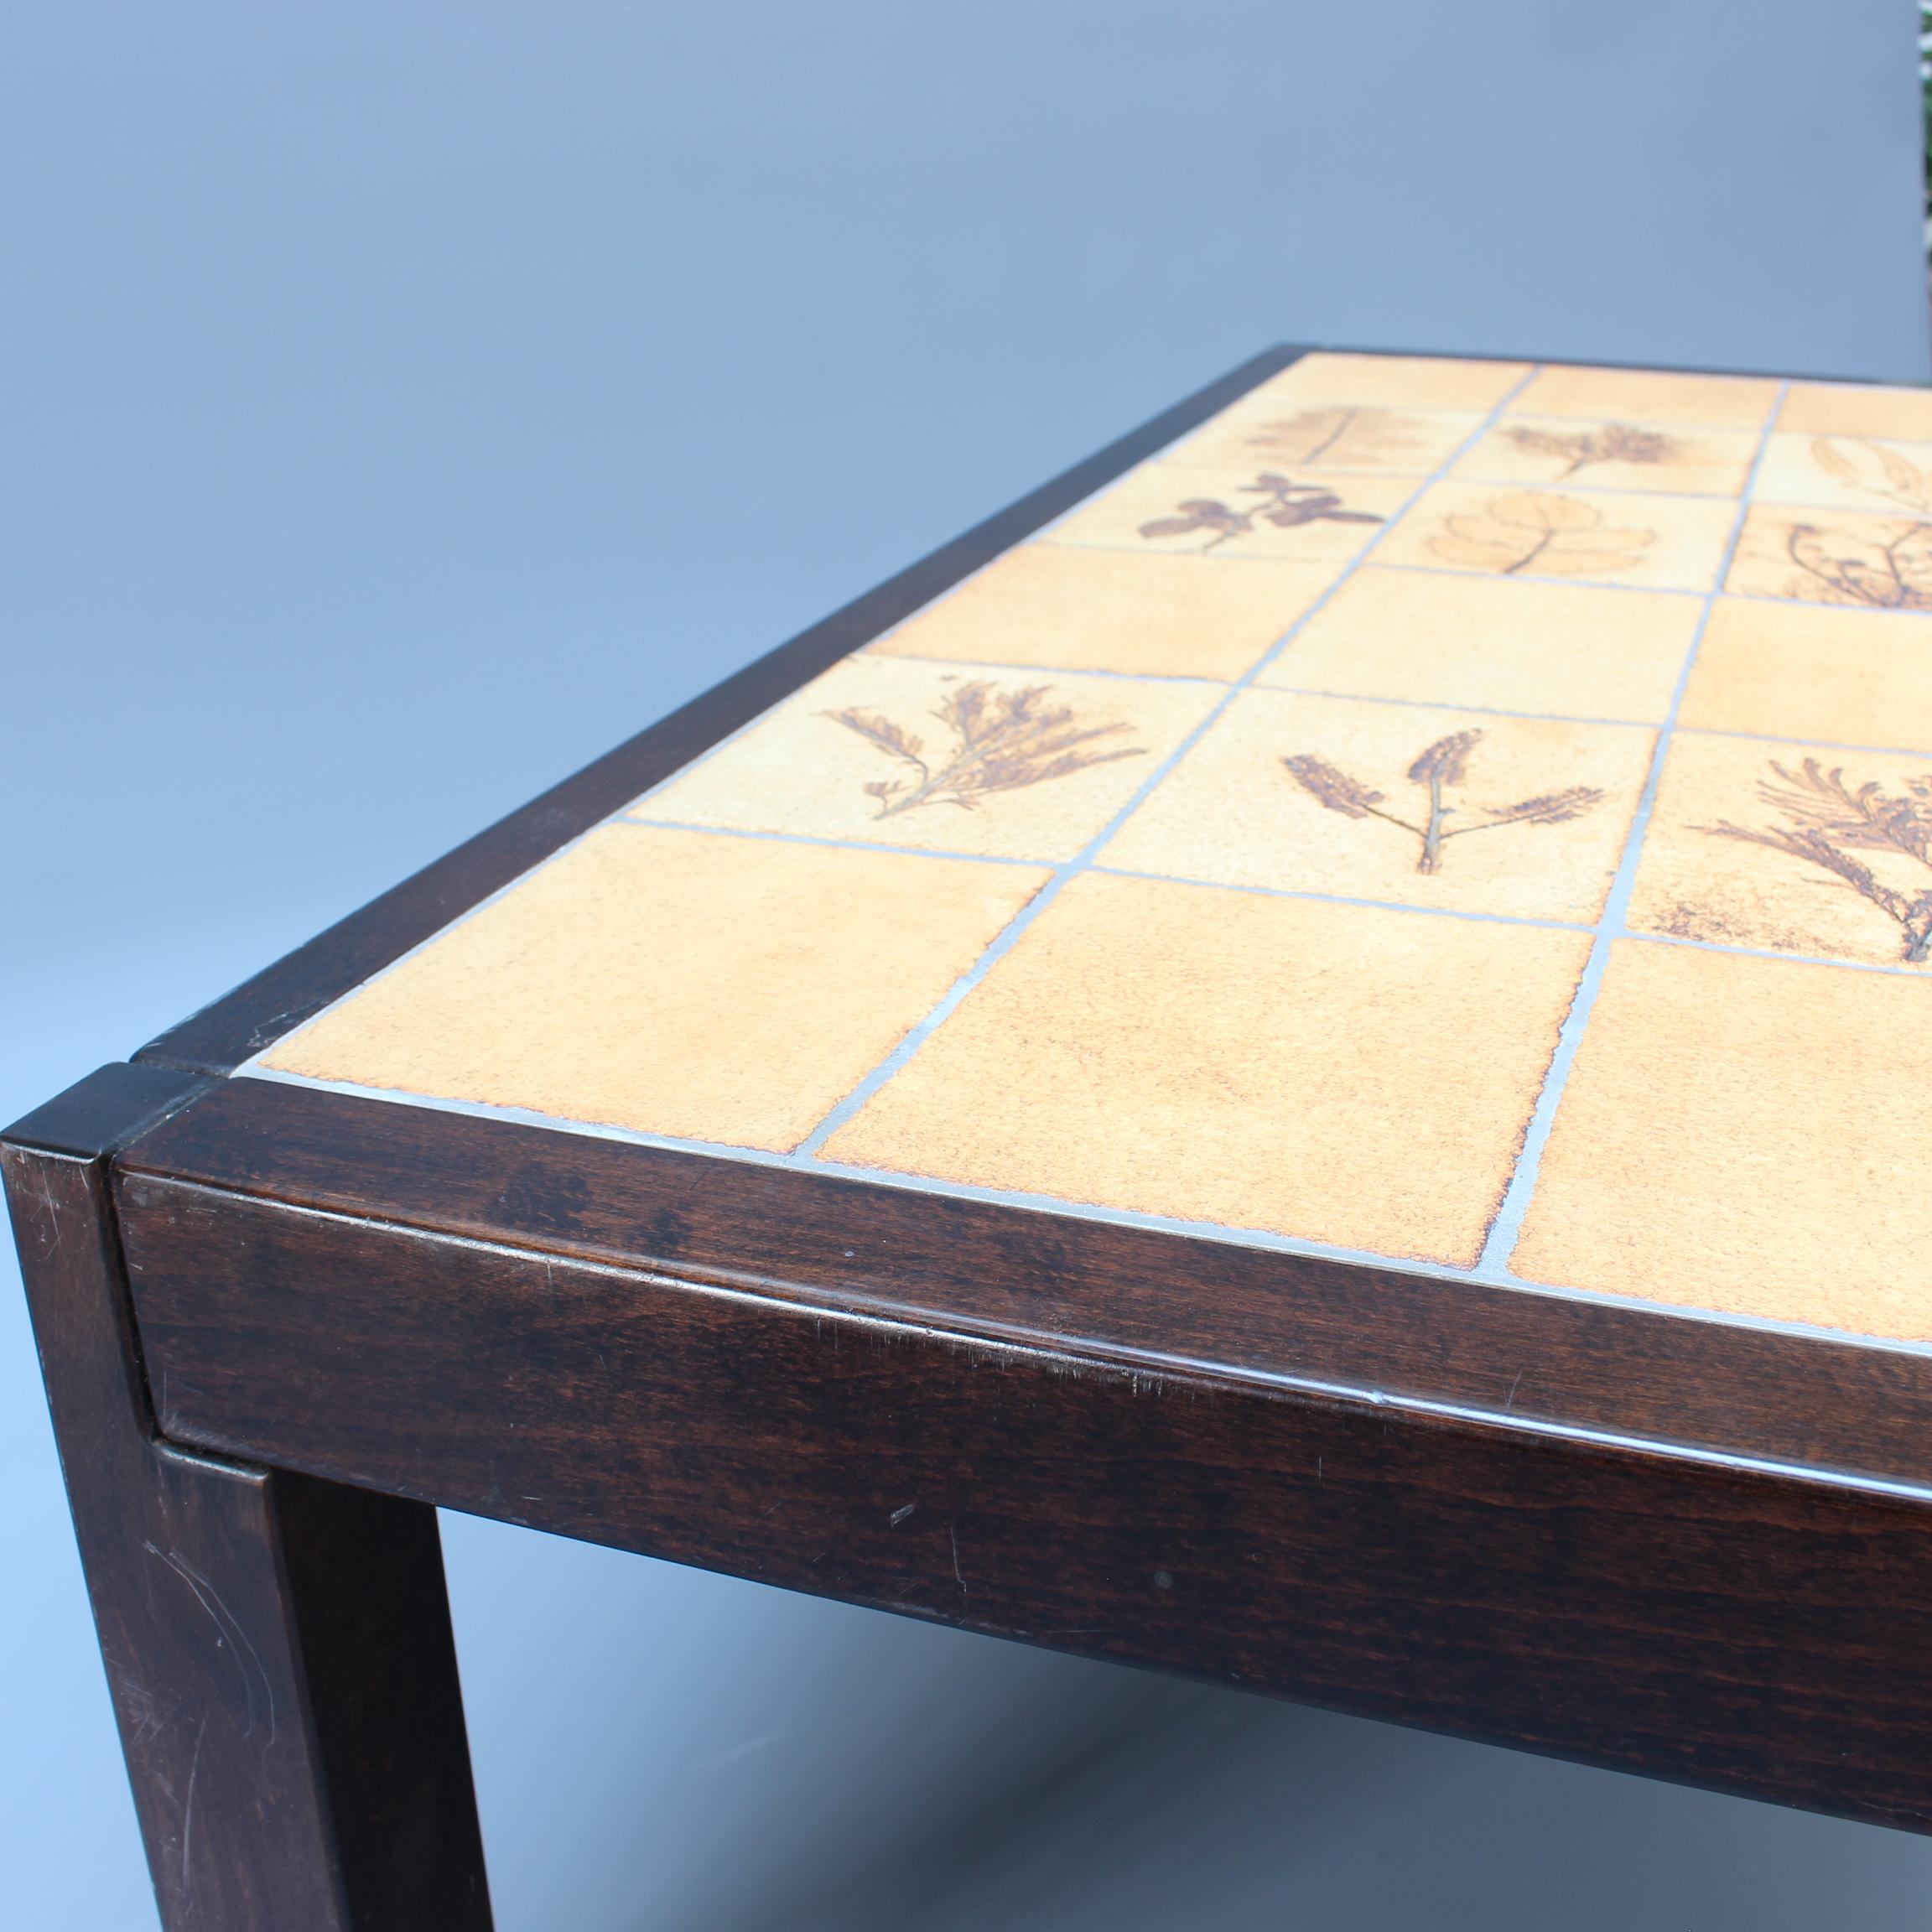 Vintage French Coffee Table with Leaf Motif Tiles by Roger Capron (circa 1970s) For Sale 9